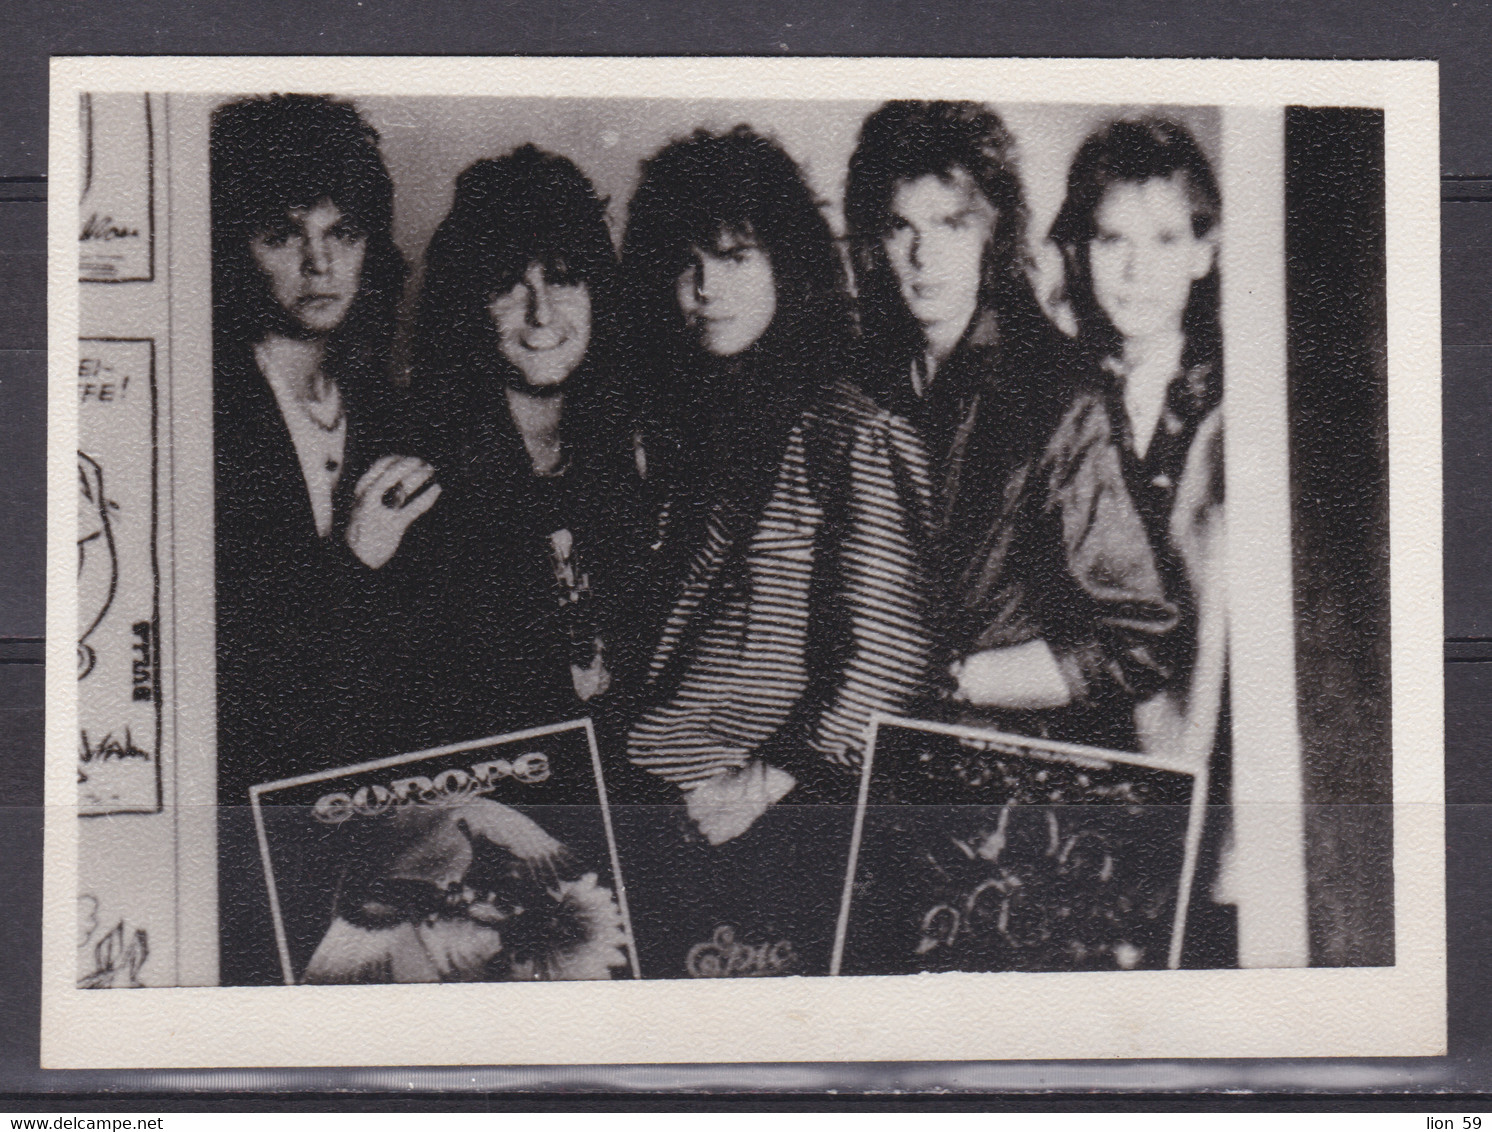 272895 / Europe (band) - Swedish Rock Band Formed In Upplands Väsby, Sweden In 1979, By Frontman Joey Tempest Photo - Photographs